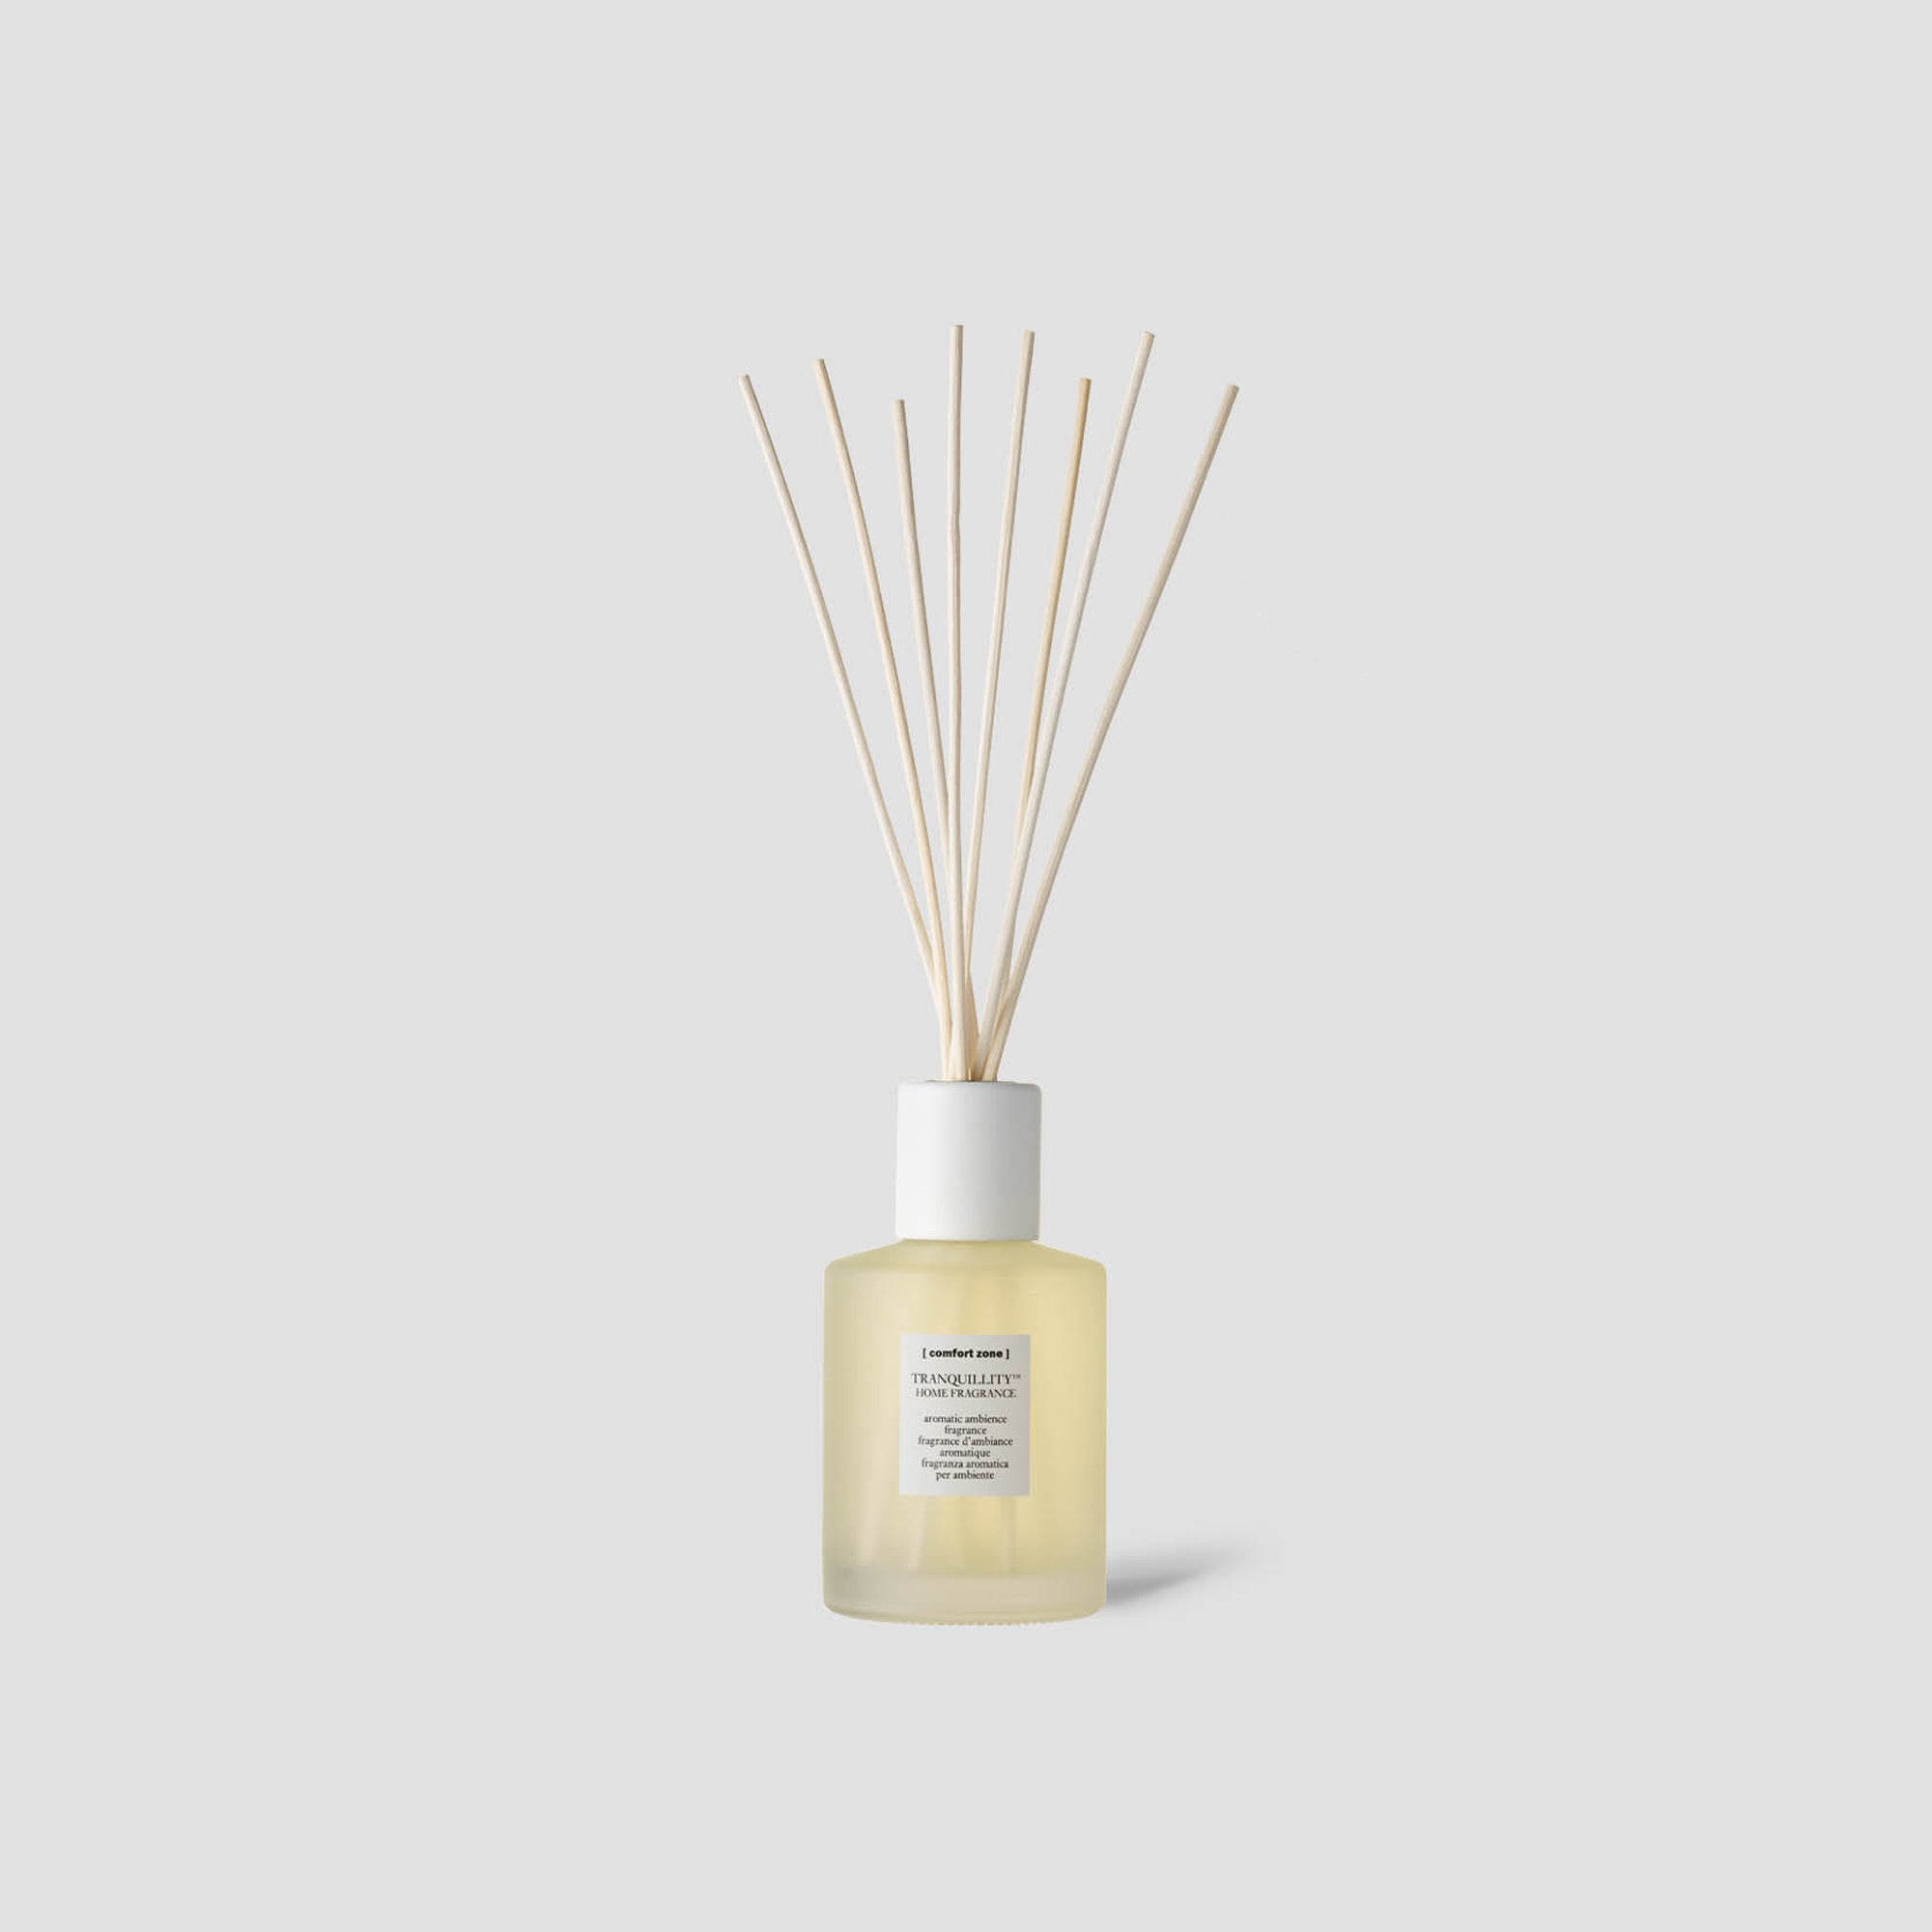 Tranquillity™ Home Fragrance (Room Fragrance Diffuser) - 500ml - [ comfort zone ]